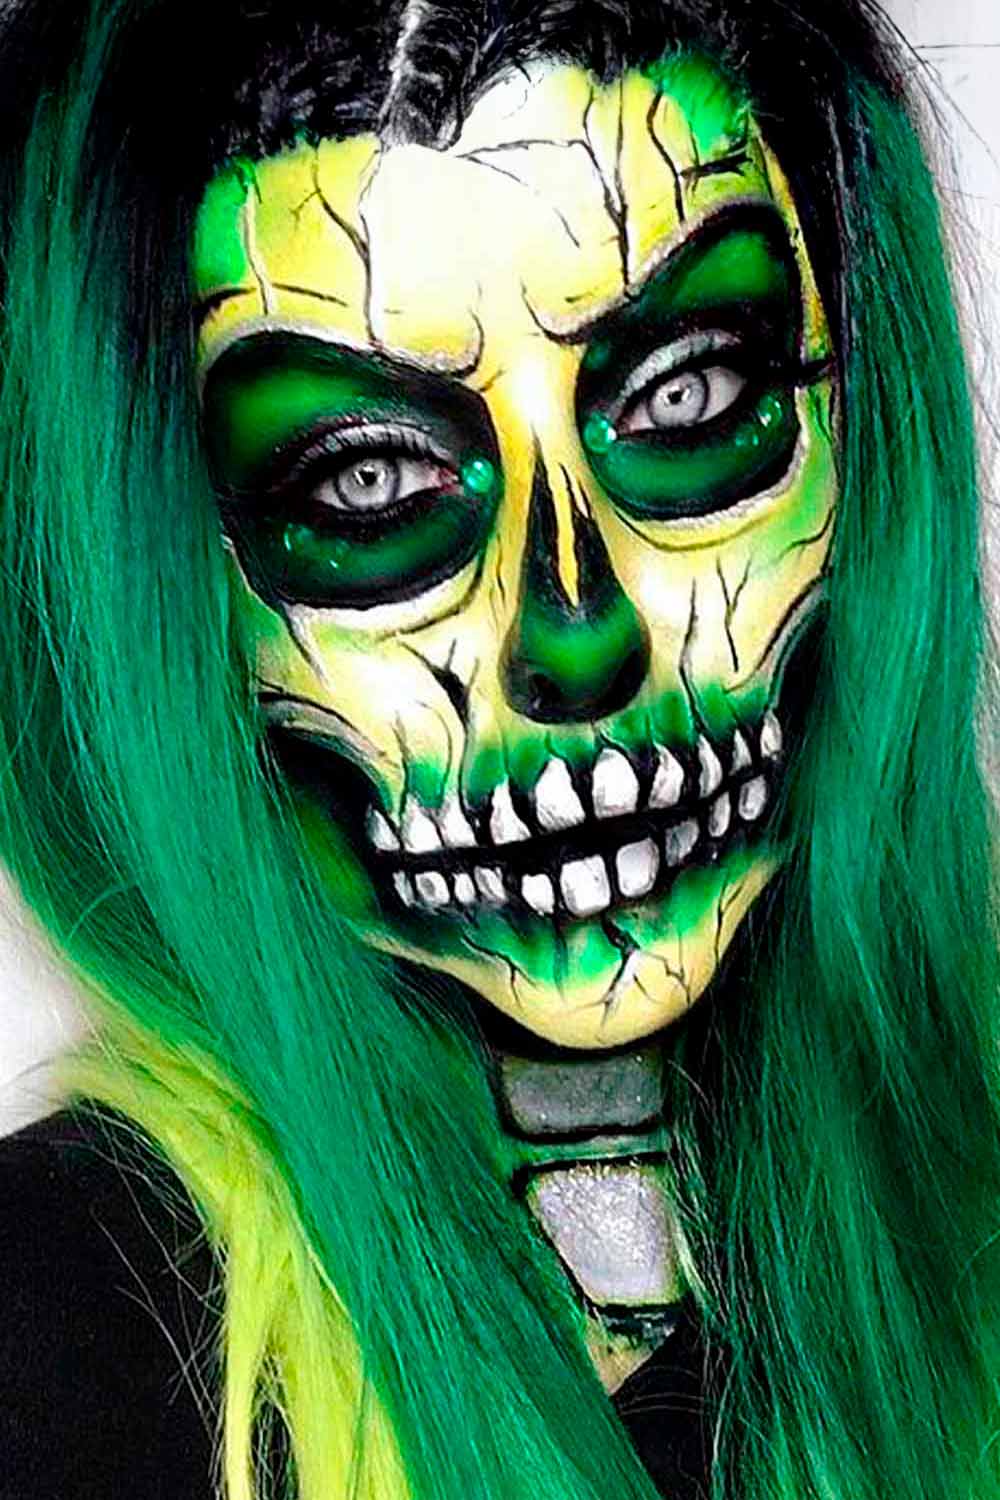 Colorful Skull Makeup Ideas